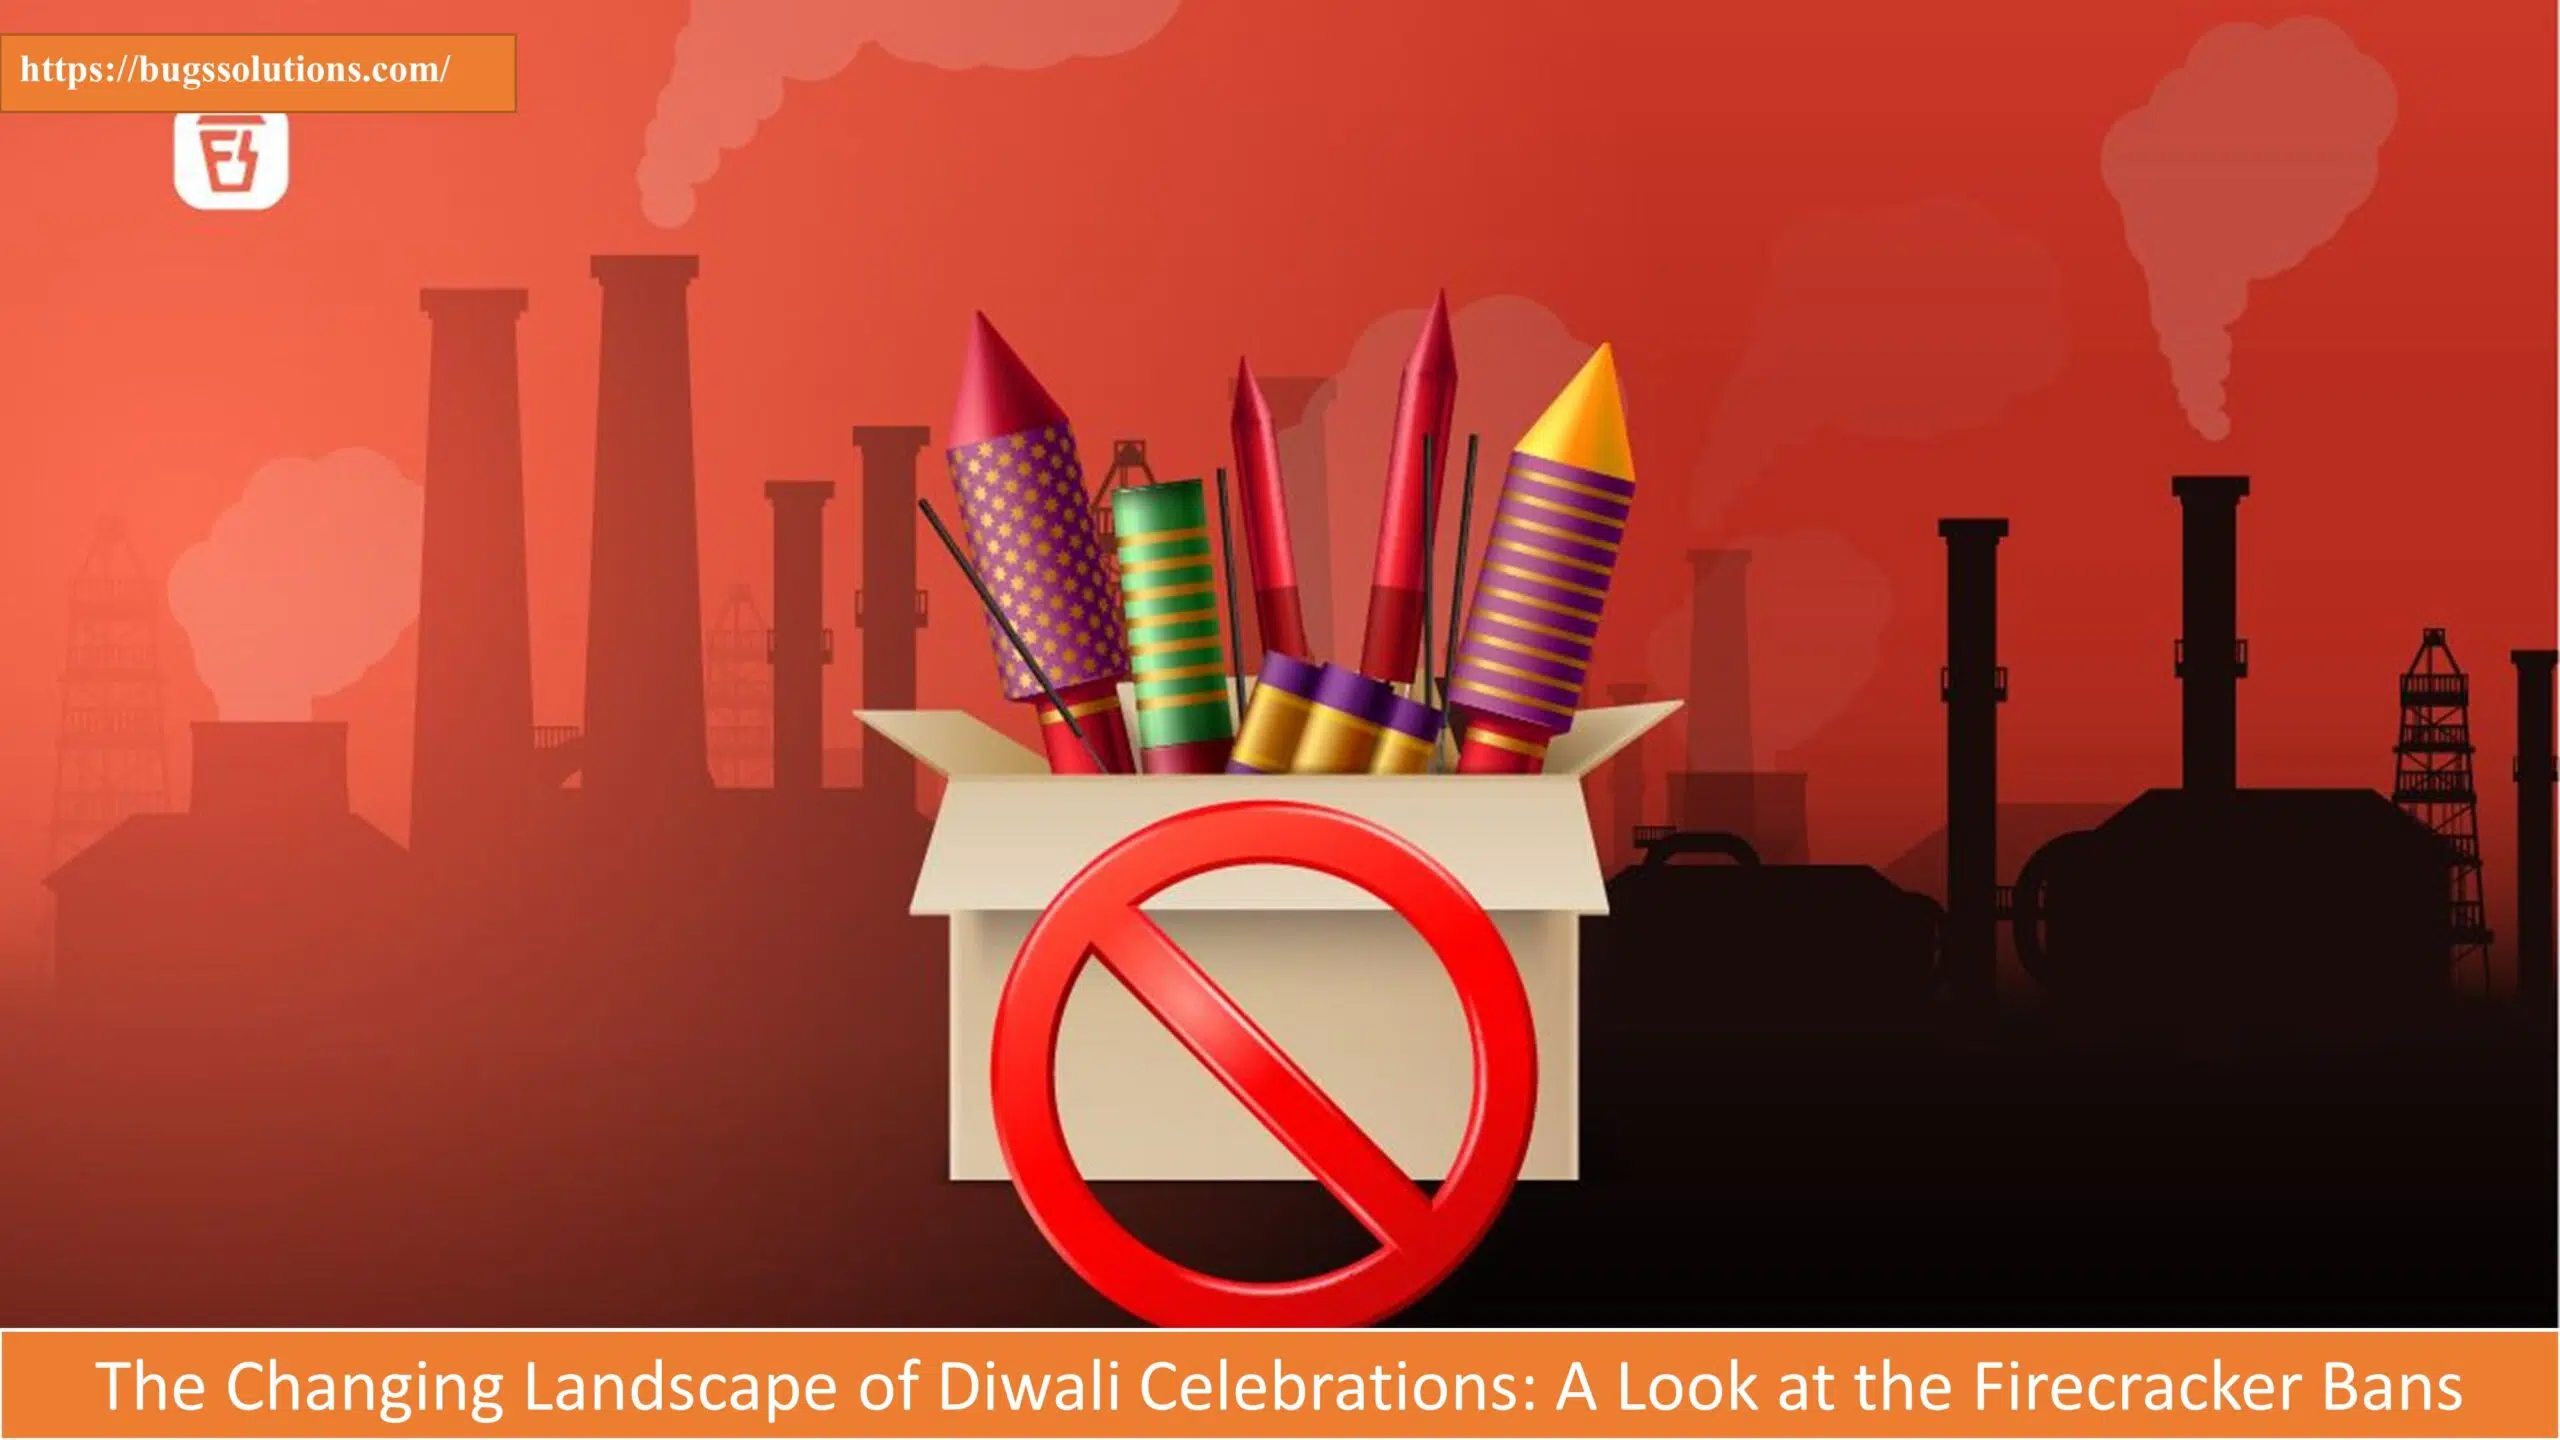 The Changing Landscape of Diwali Celebrations: A Look at the Firecracker Bans